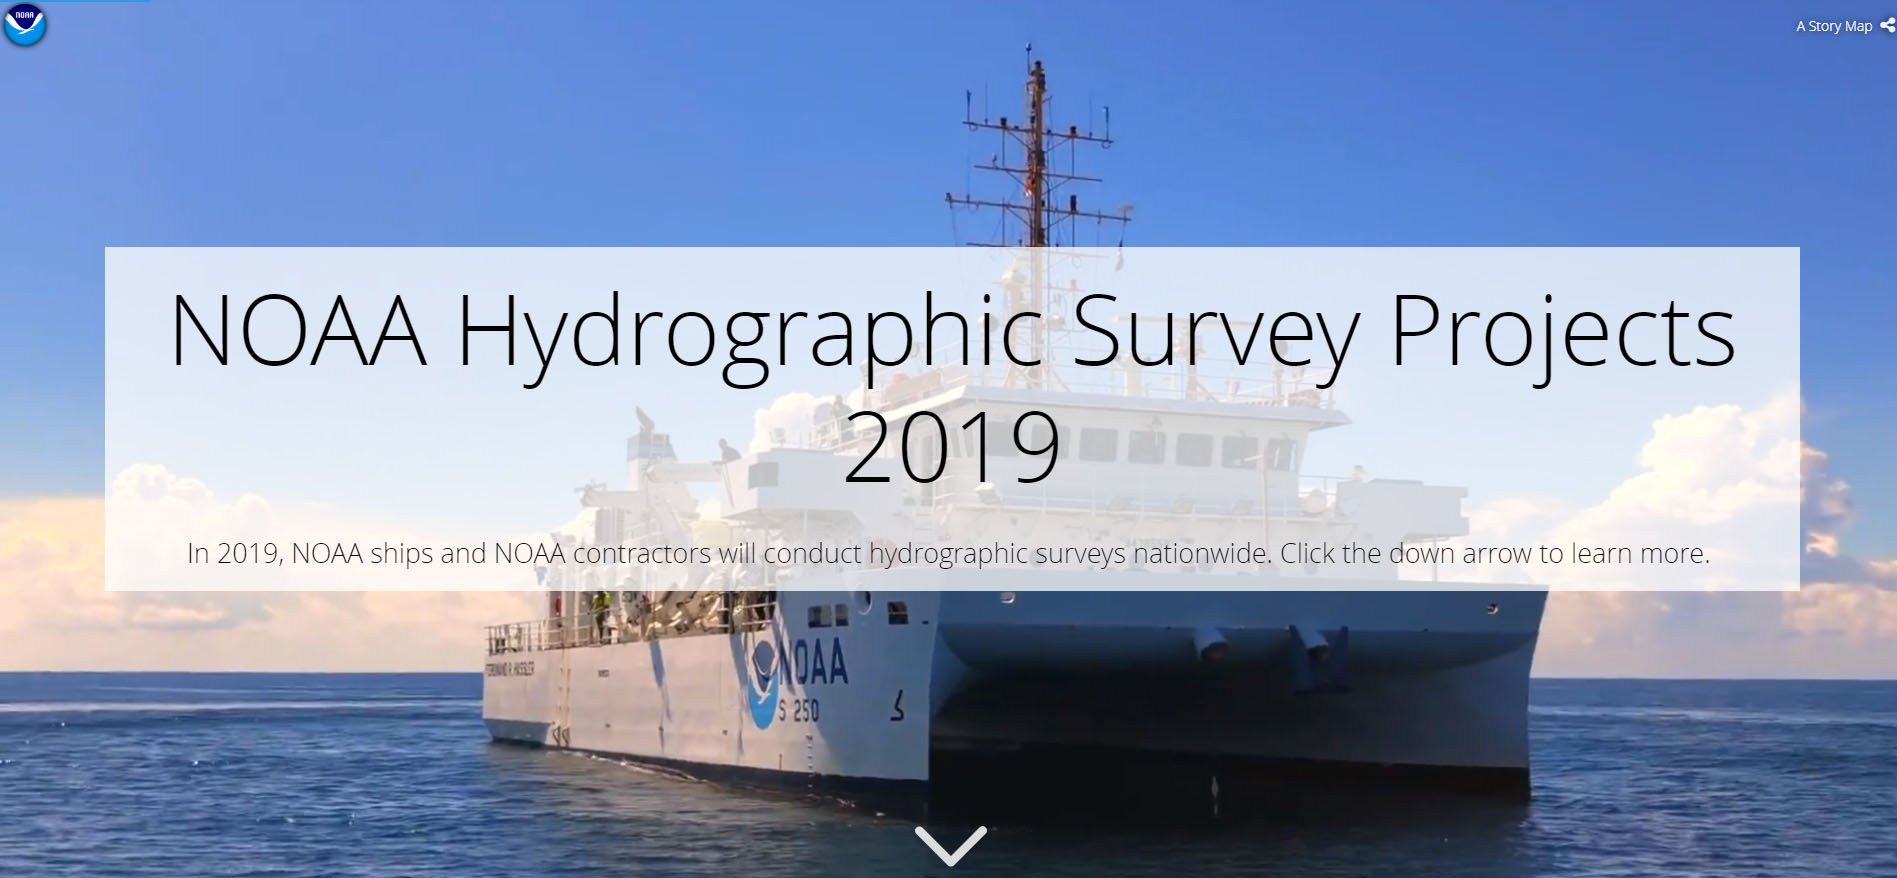 NOAA Hydrographic Survey Projects 2019 story map cover